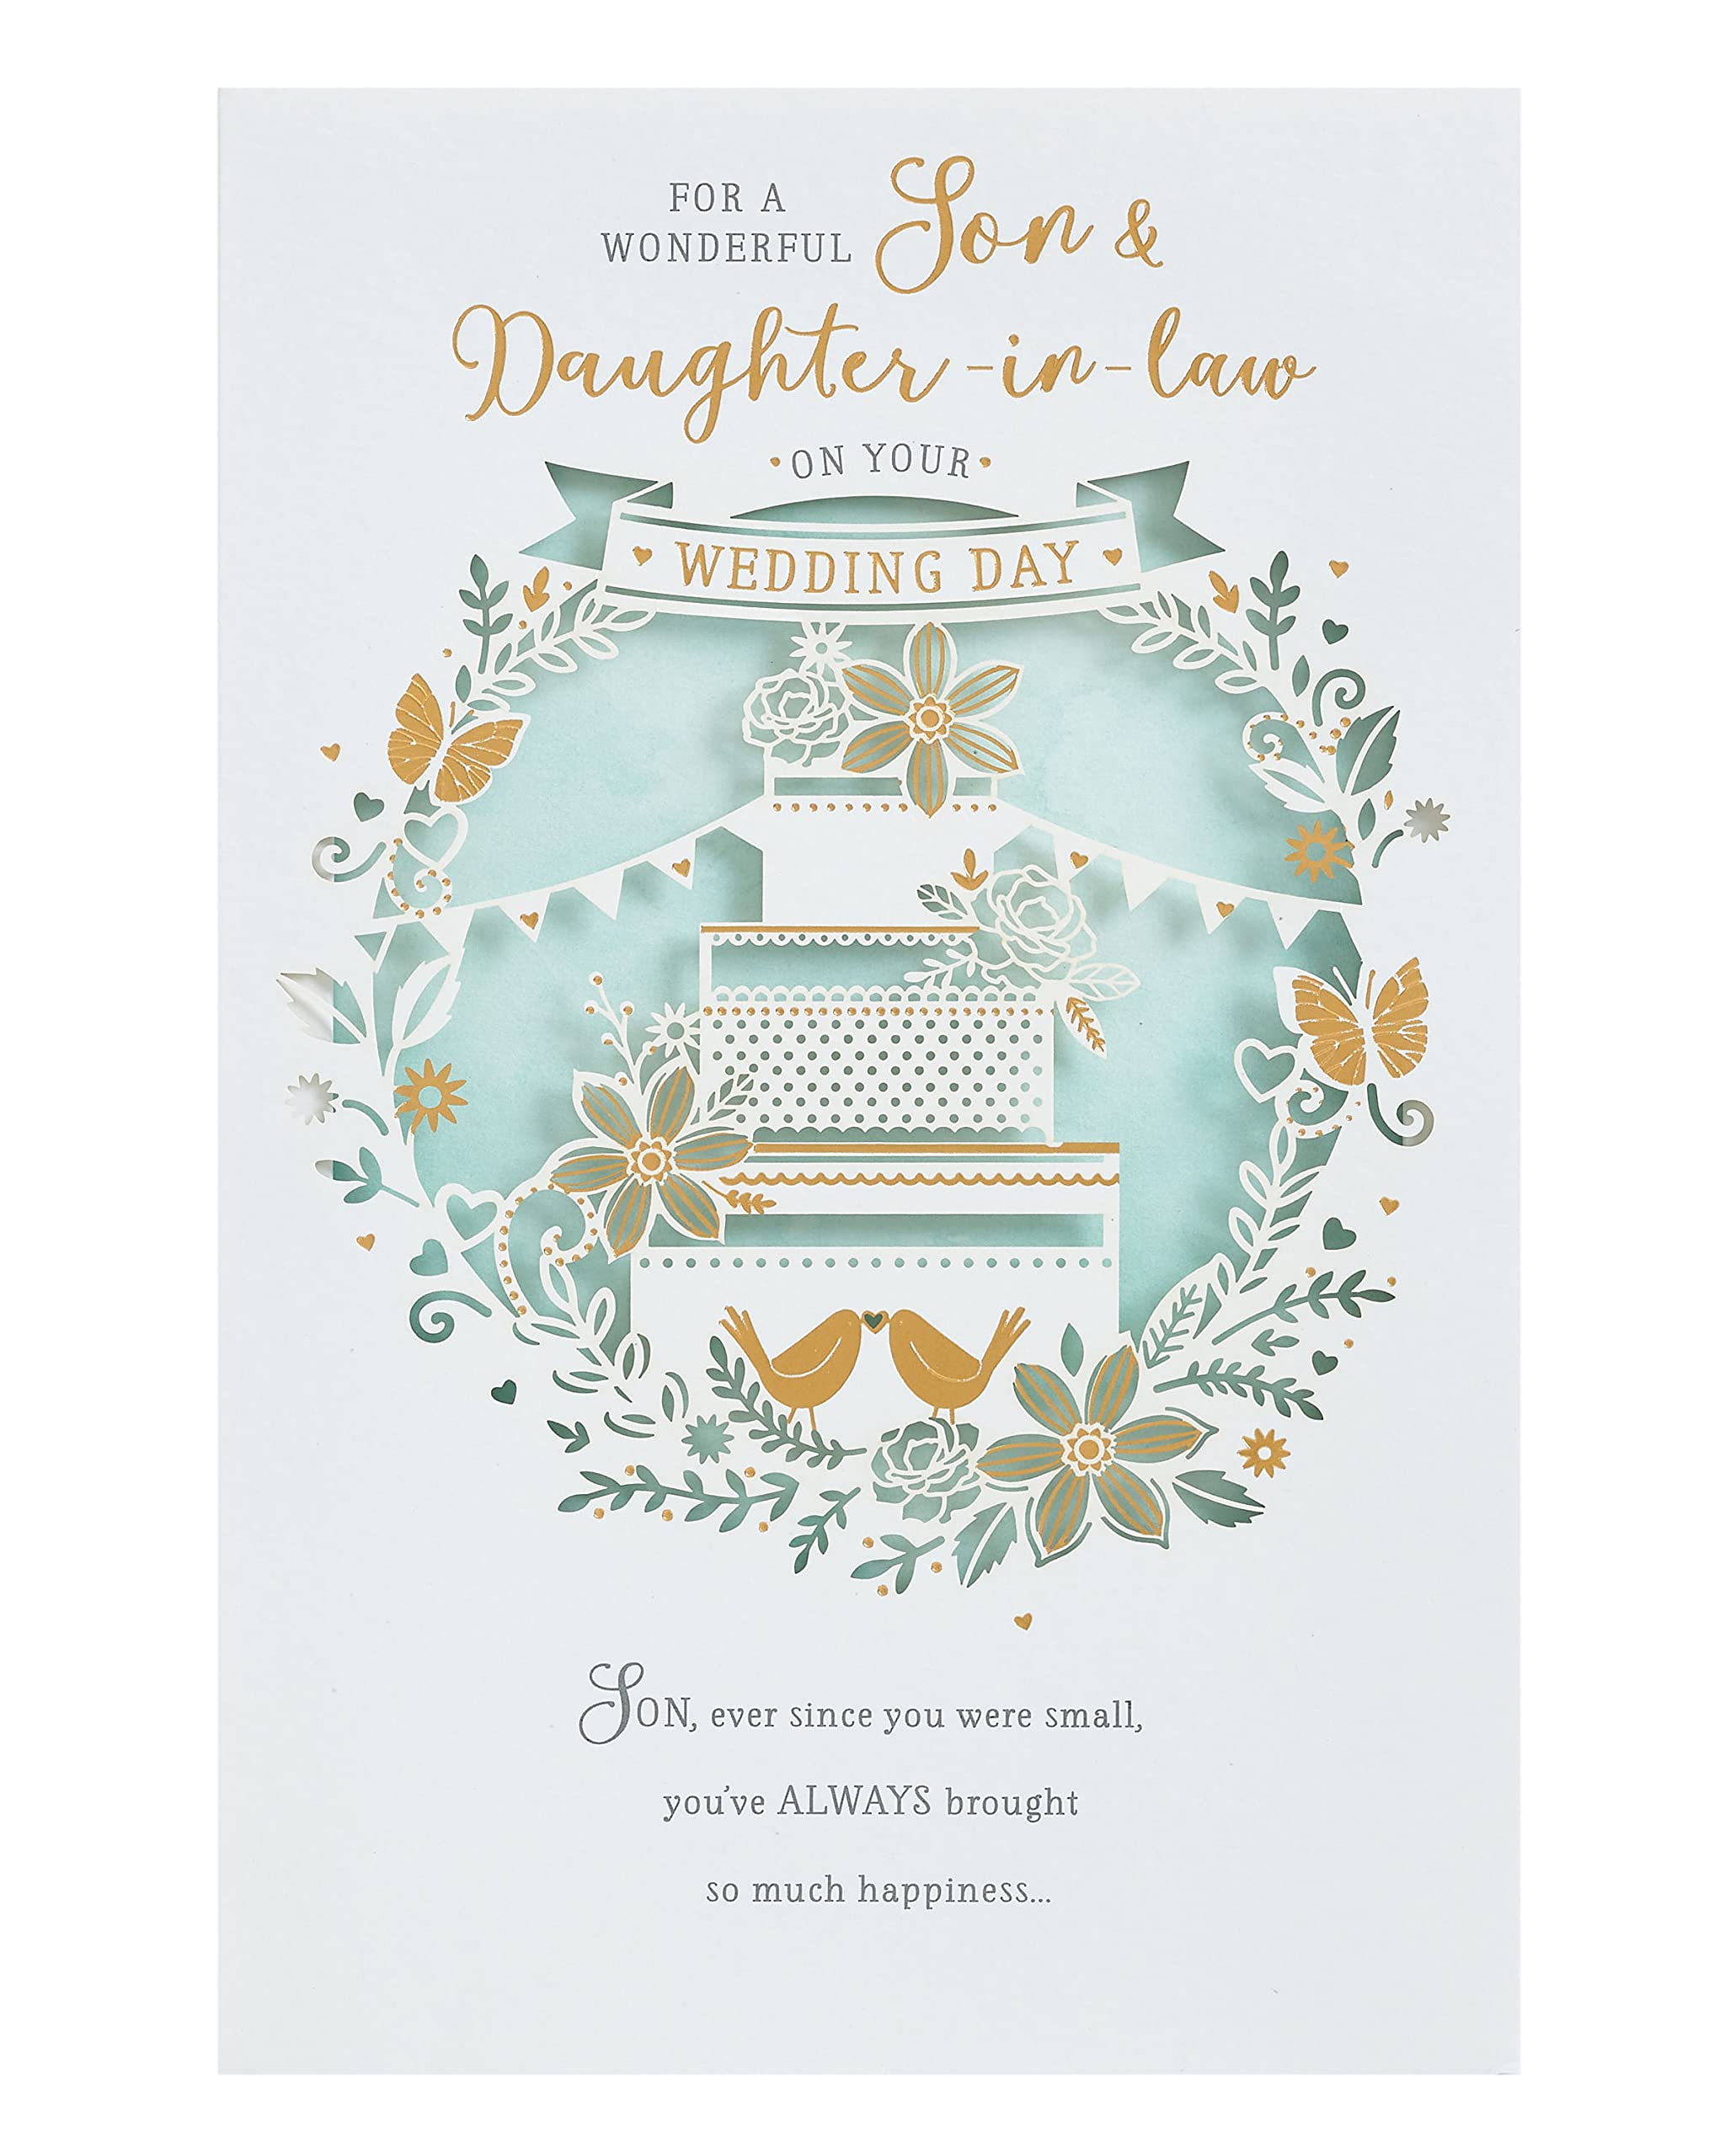 UK Greetings Son & Daughter-In-Law Wedding Card With Envelope - Pretty Cake Design